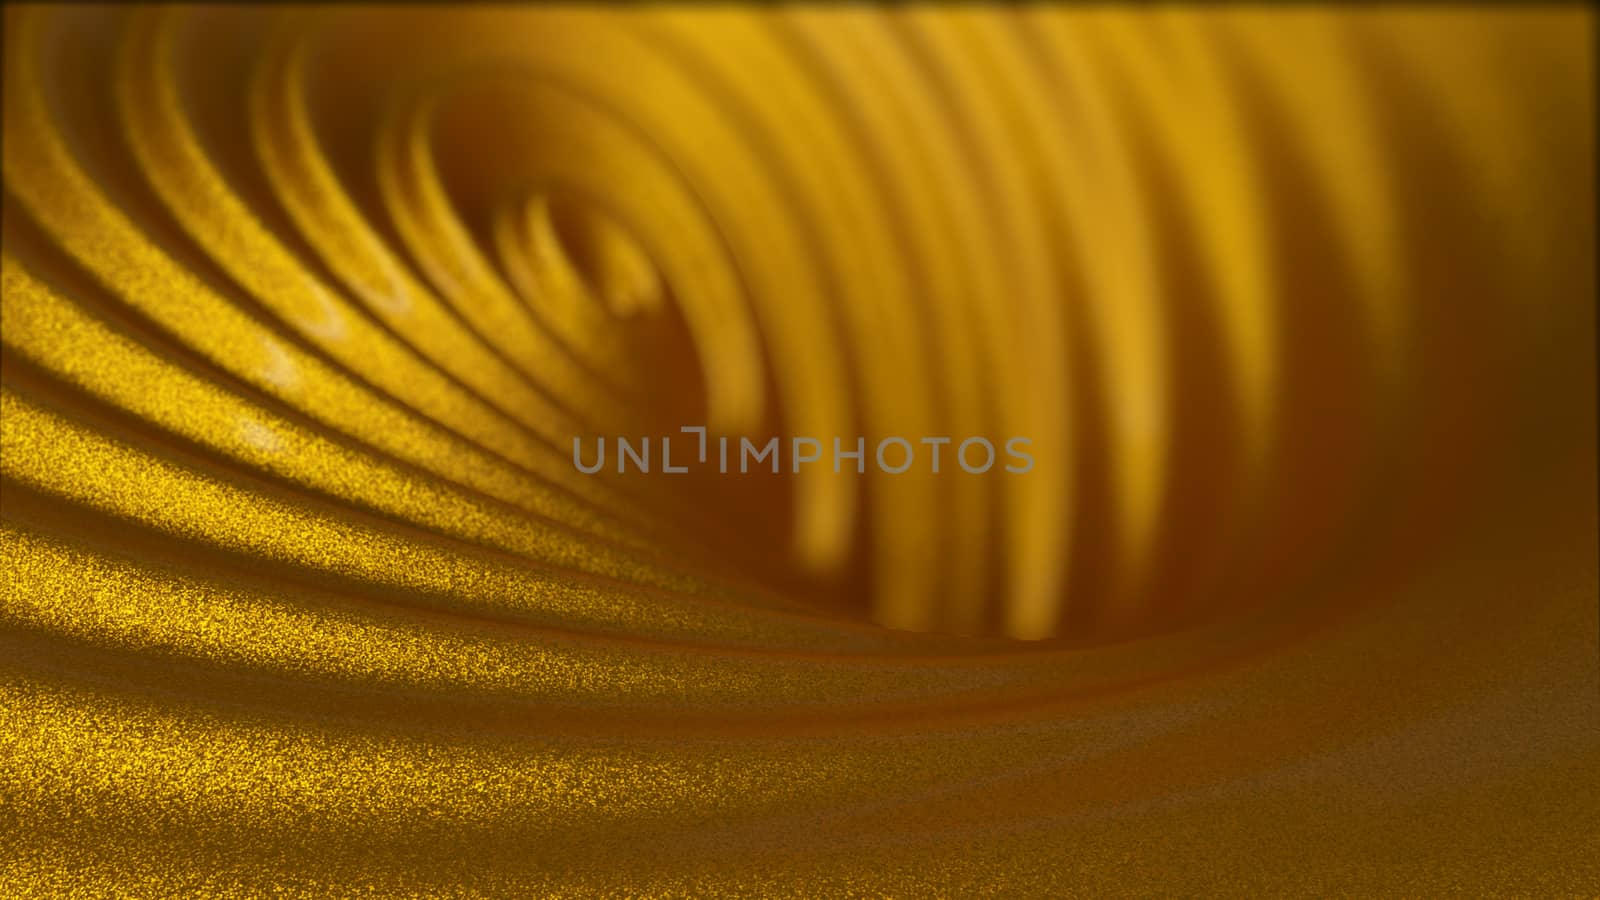 3d illustration of a golden wavy fluid in extremely shallow depth of fields.